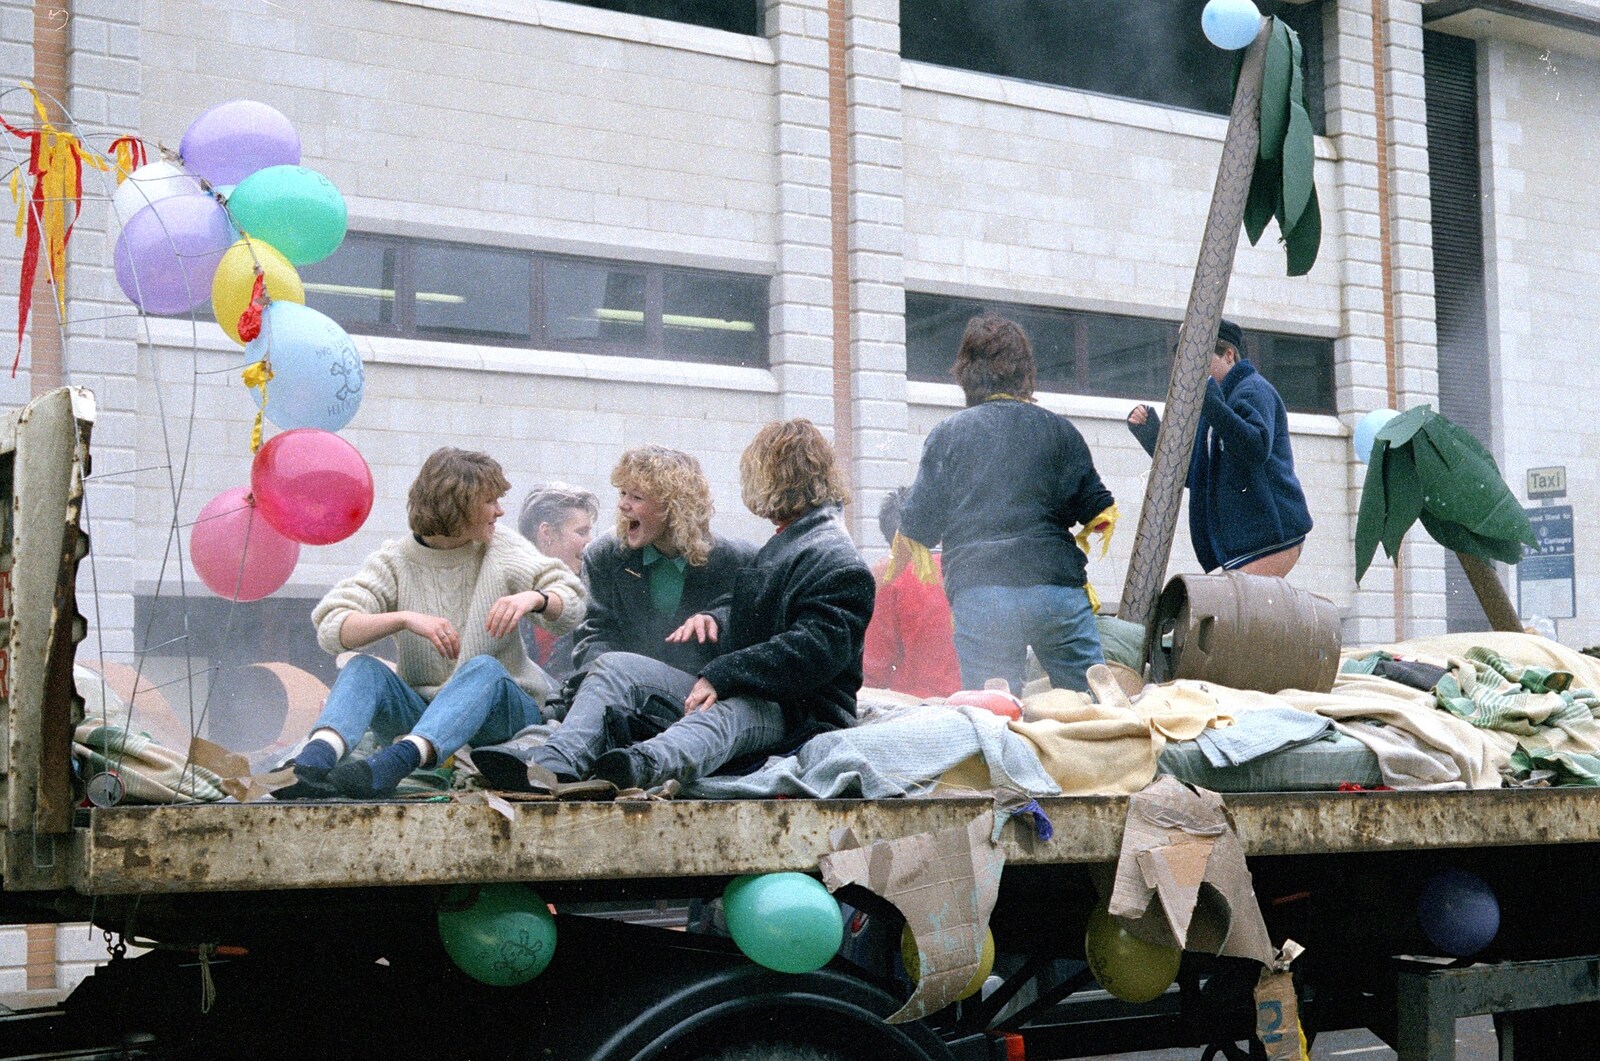 A desert island float from Uni: The PPSU Pirate RAG Parade, Plymouth, Devon - 14th February 1987